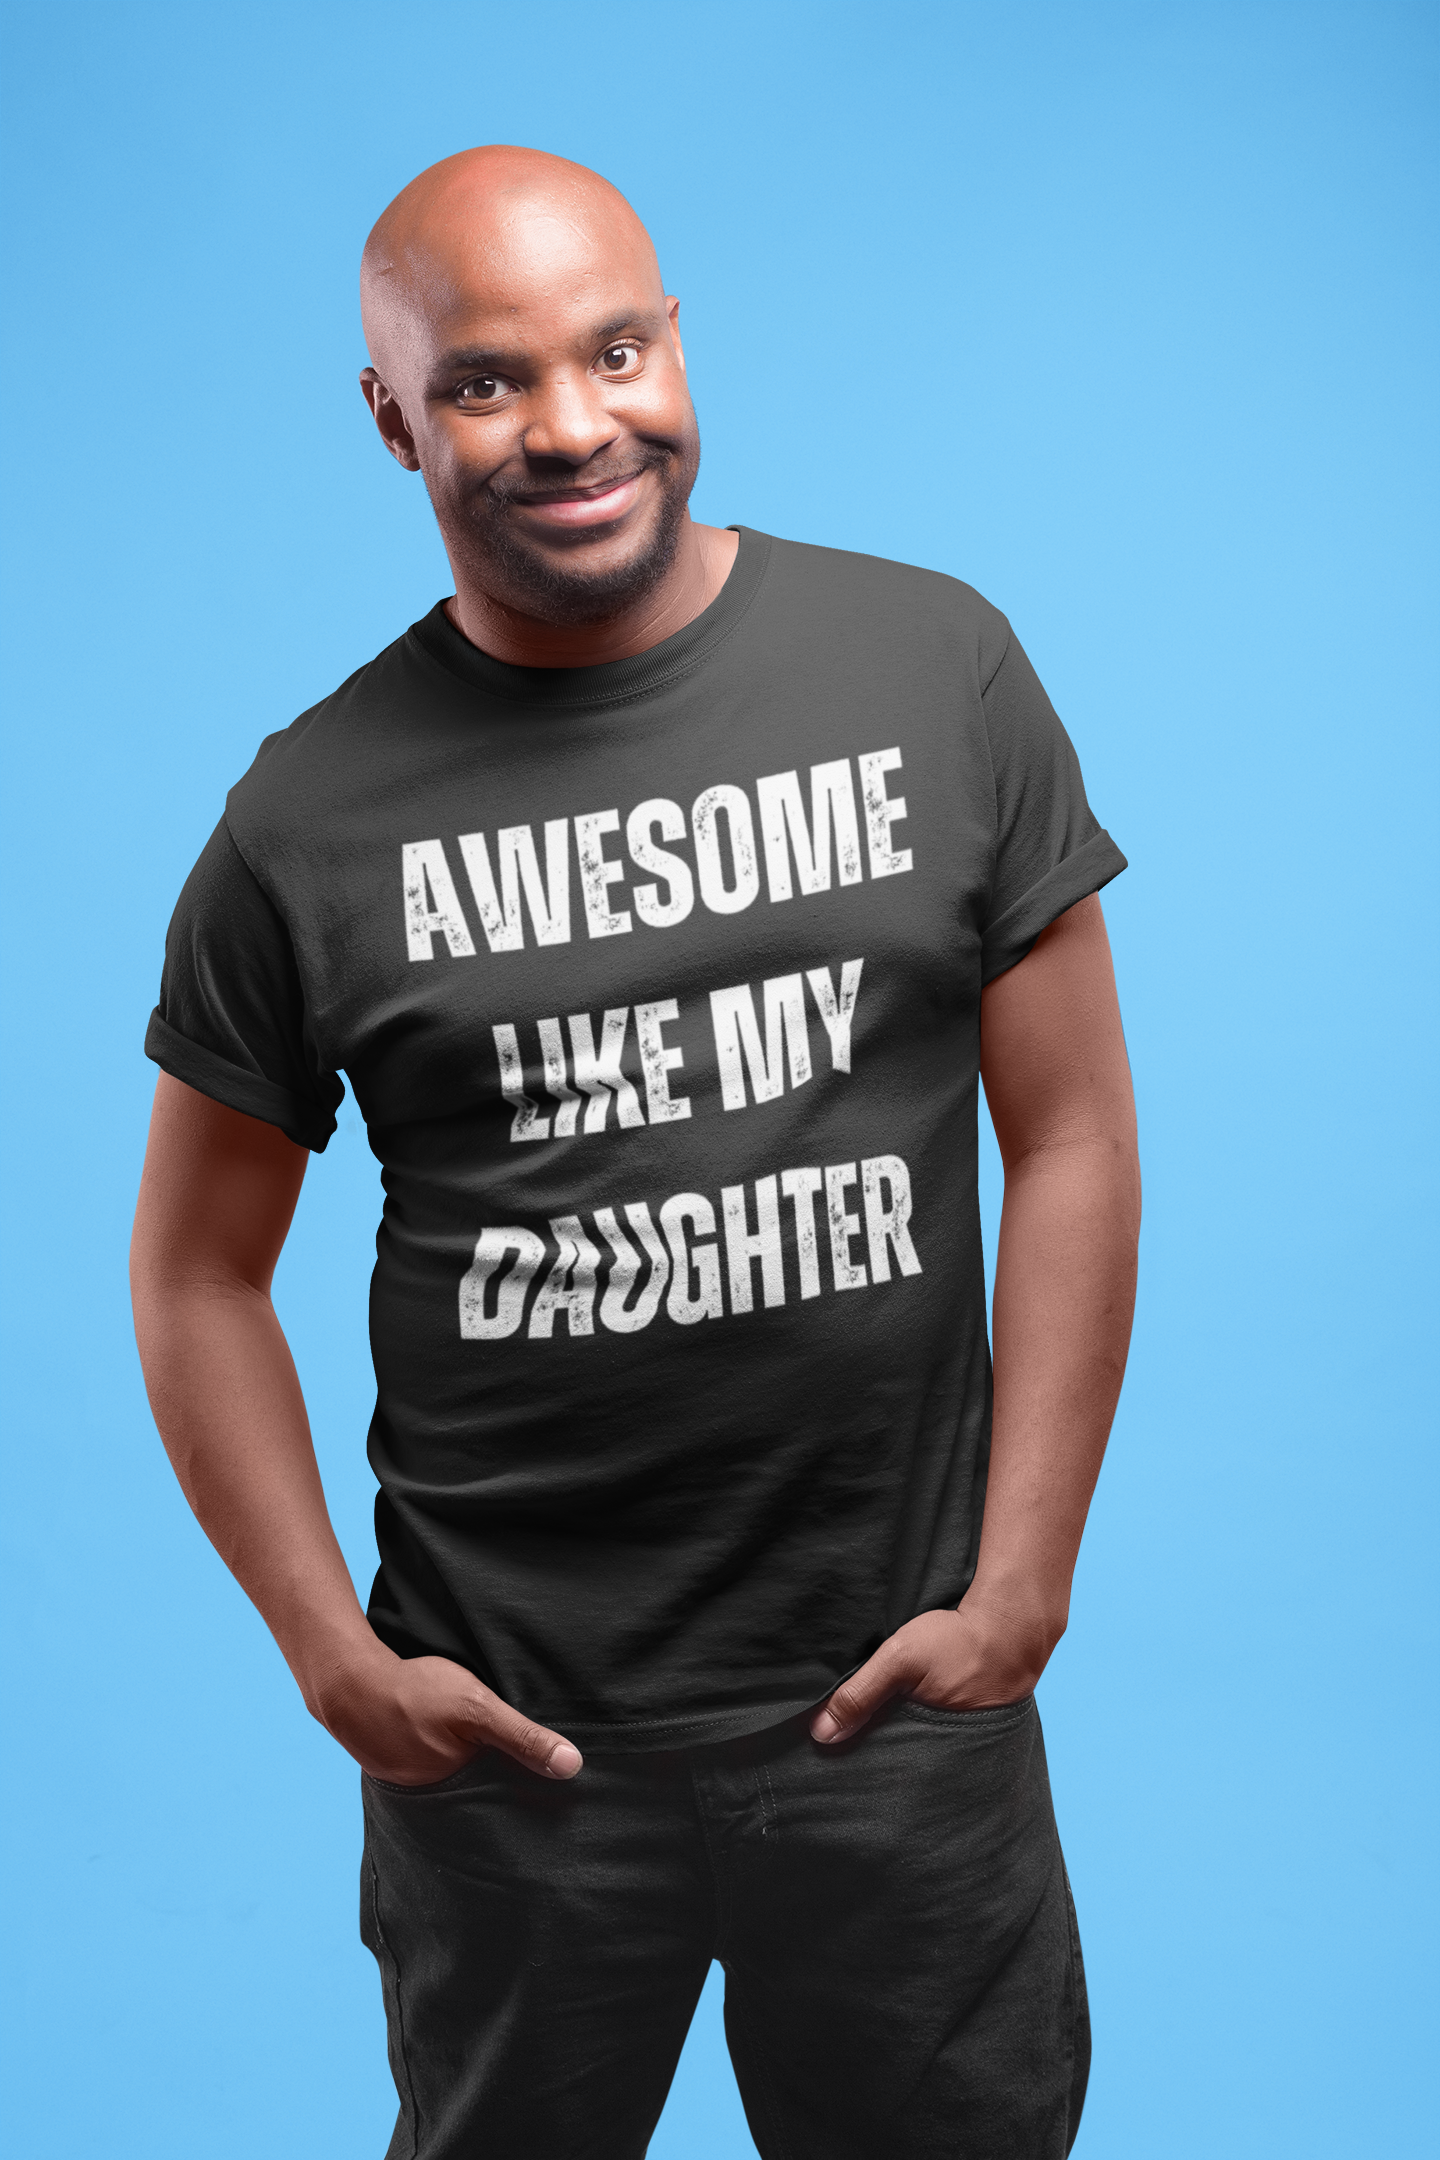 Awesome Like My Daughter G500 5.3 oz. T-Shirt